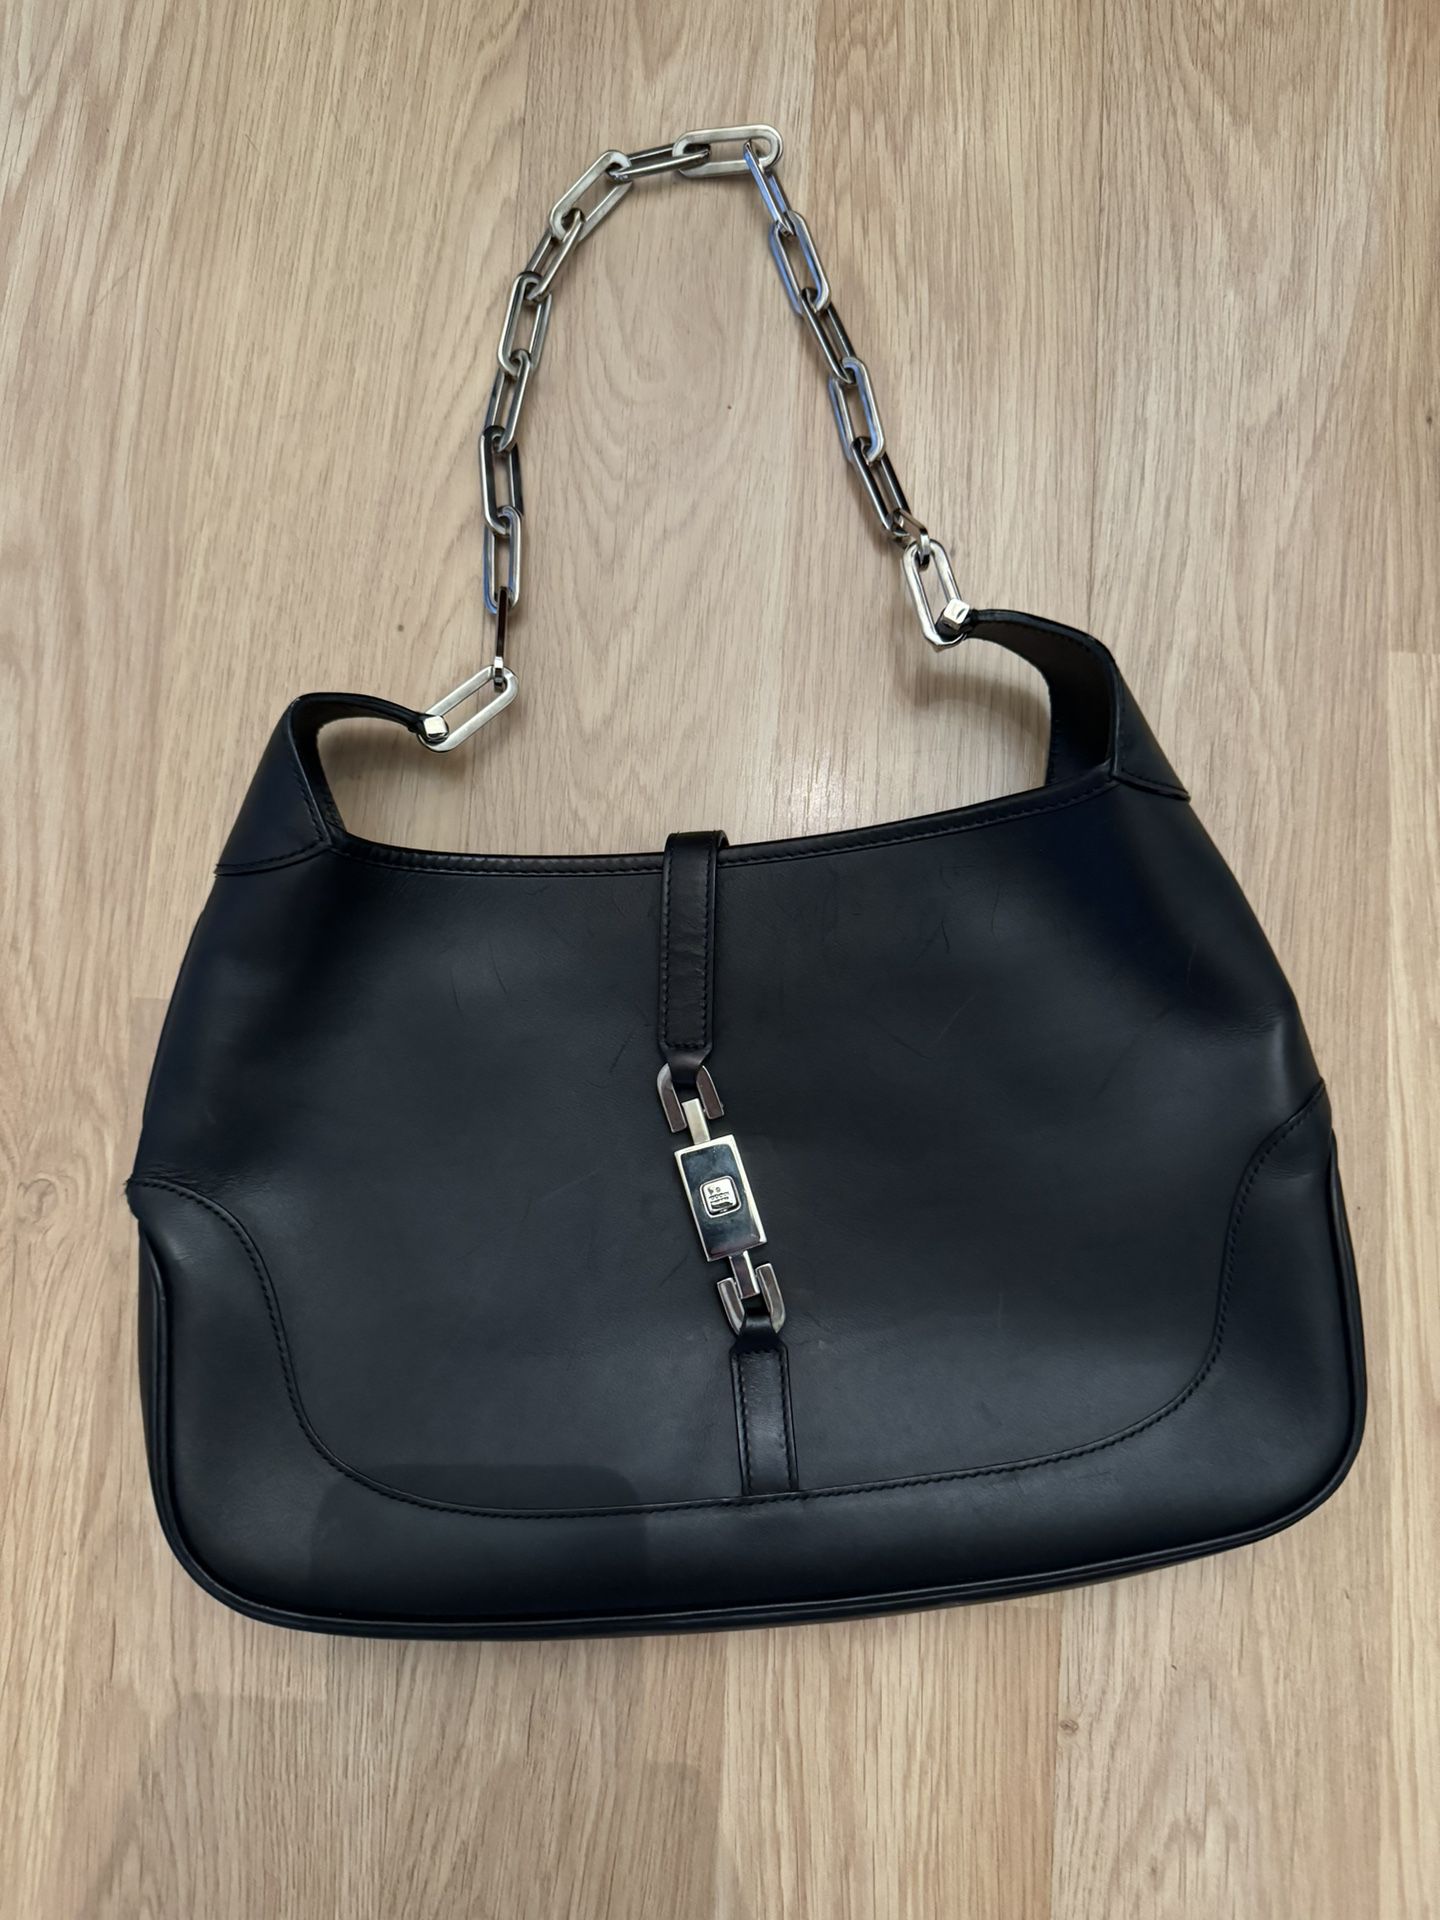 Gucci Black Leather Shoulder Bag With Chain